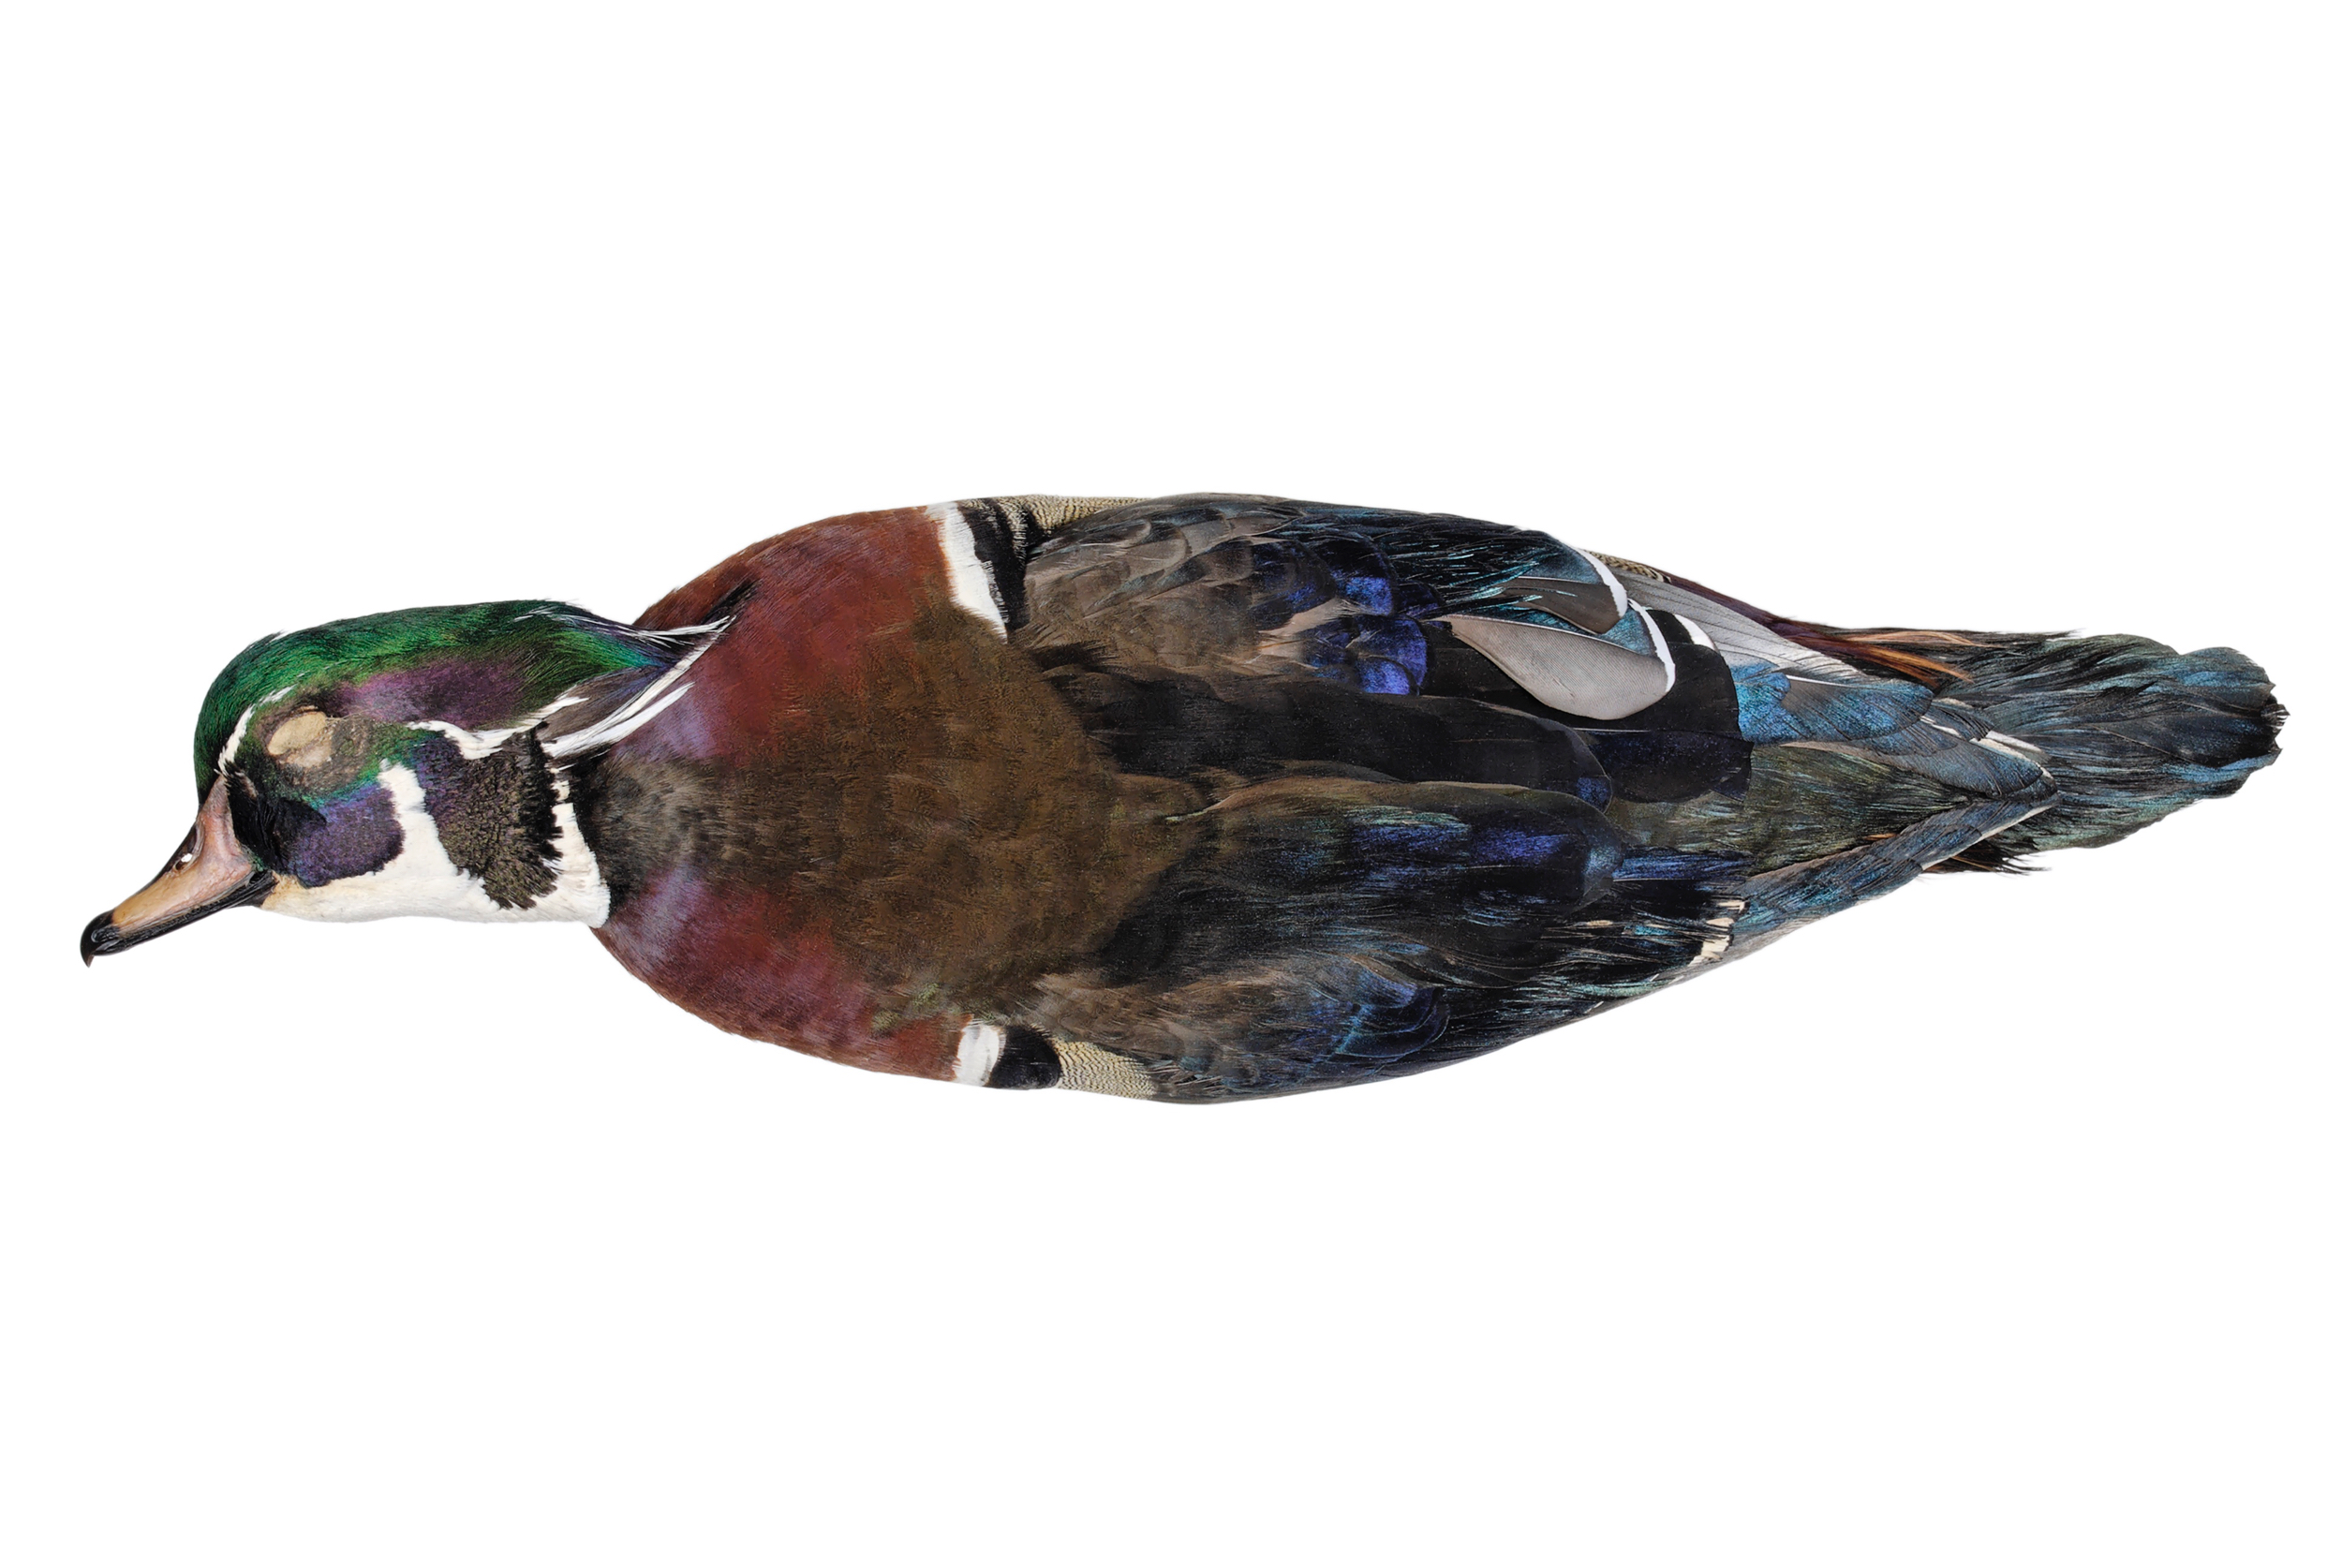   wood duck 1   8" x 12" or 12" x 18"  2007    